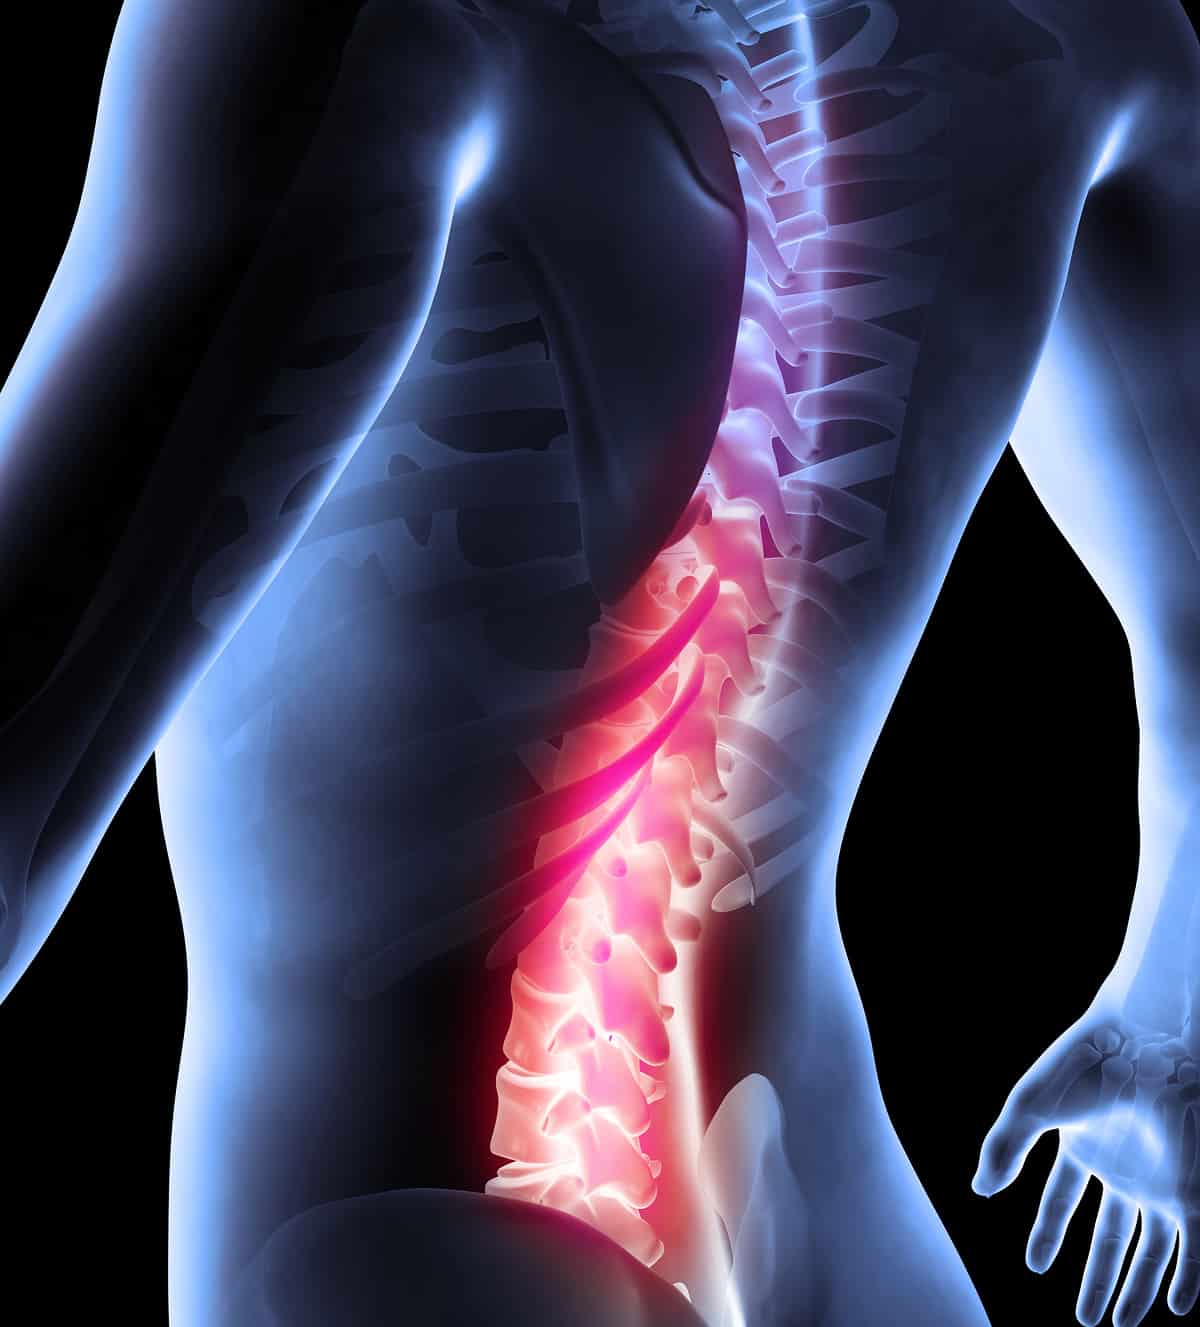 How to Effectively Treat Lower Back Pain